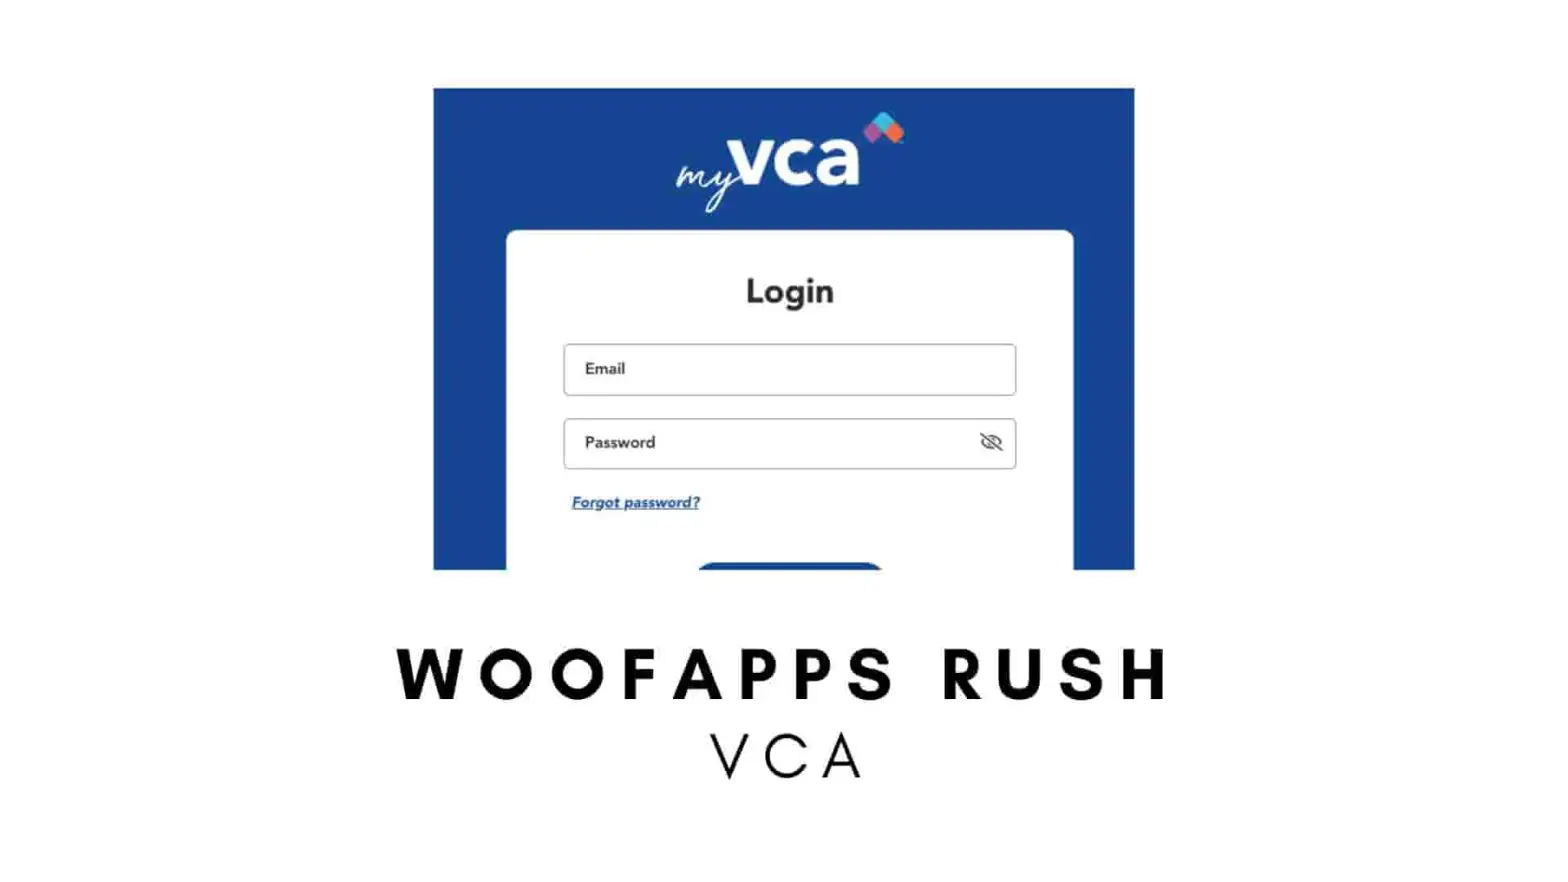 Woofapps - VCA Login and Sign-up